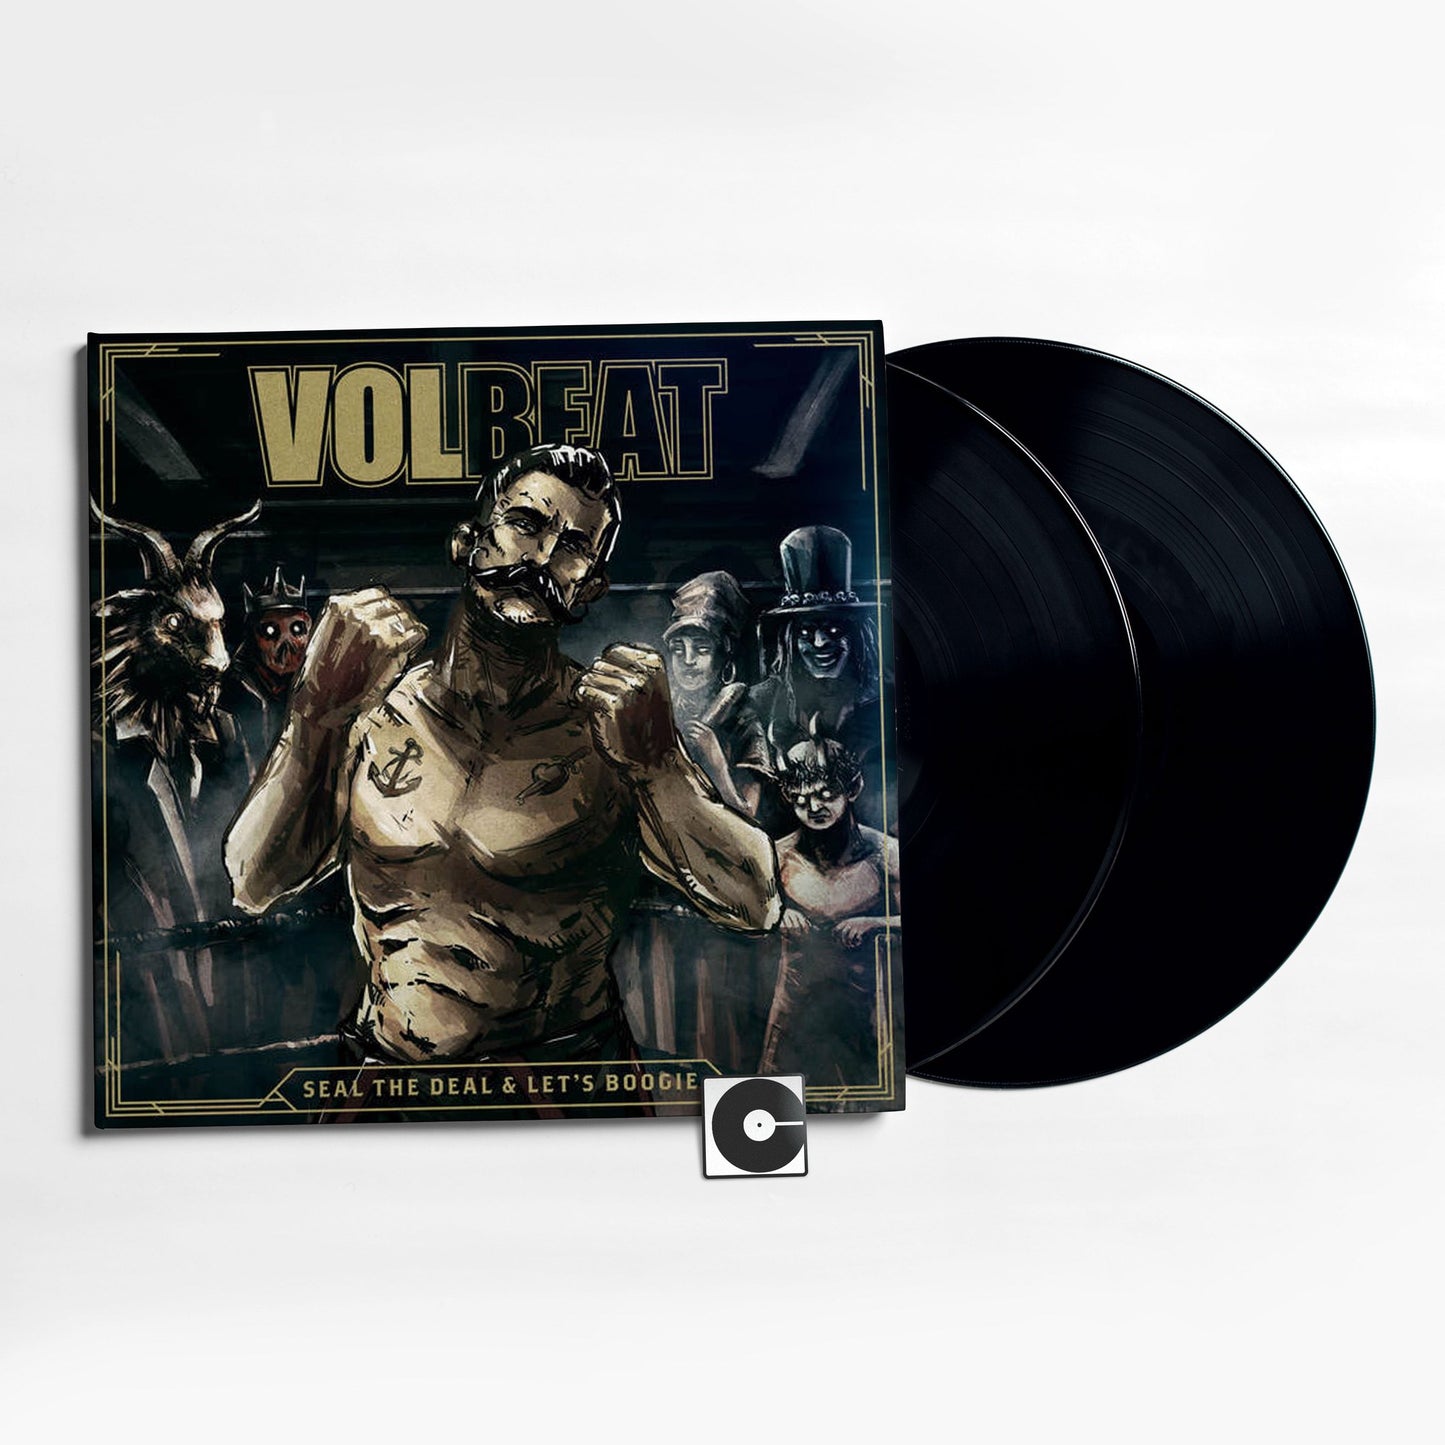 Volbeat - "Seal The Deal & Let's Boogie"